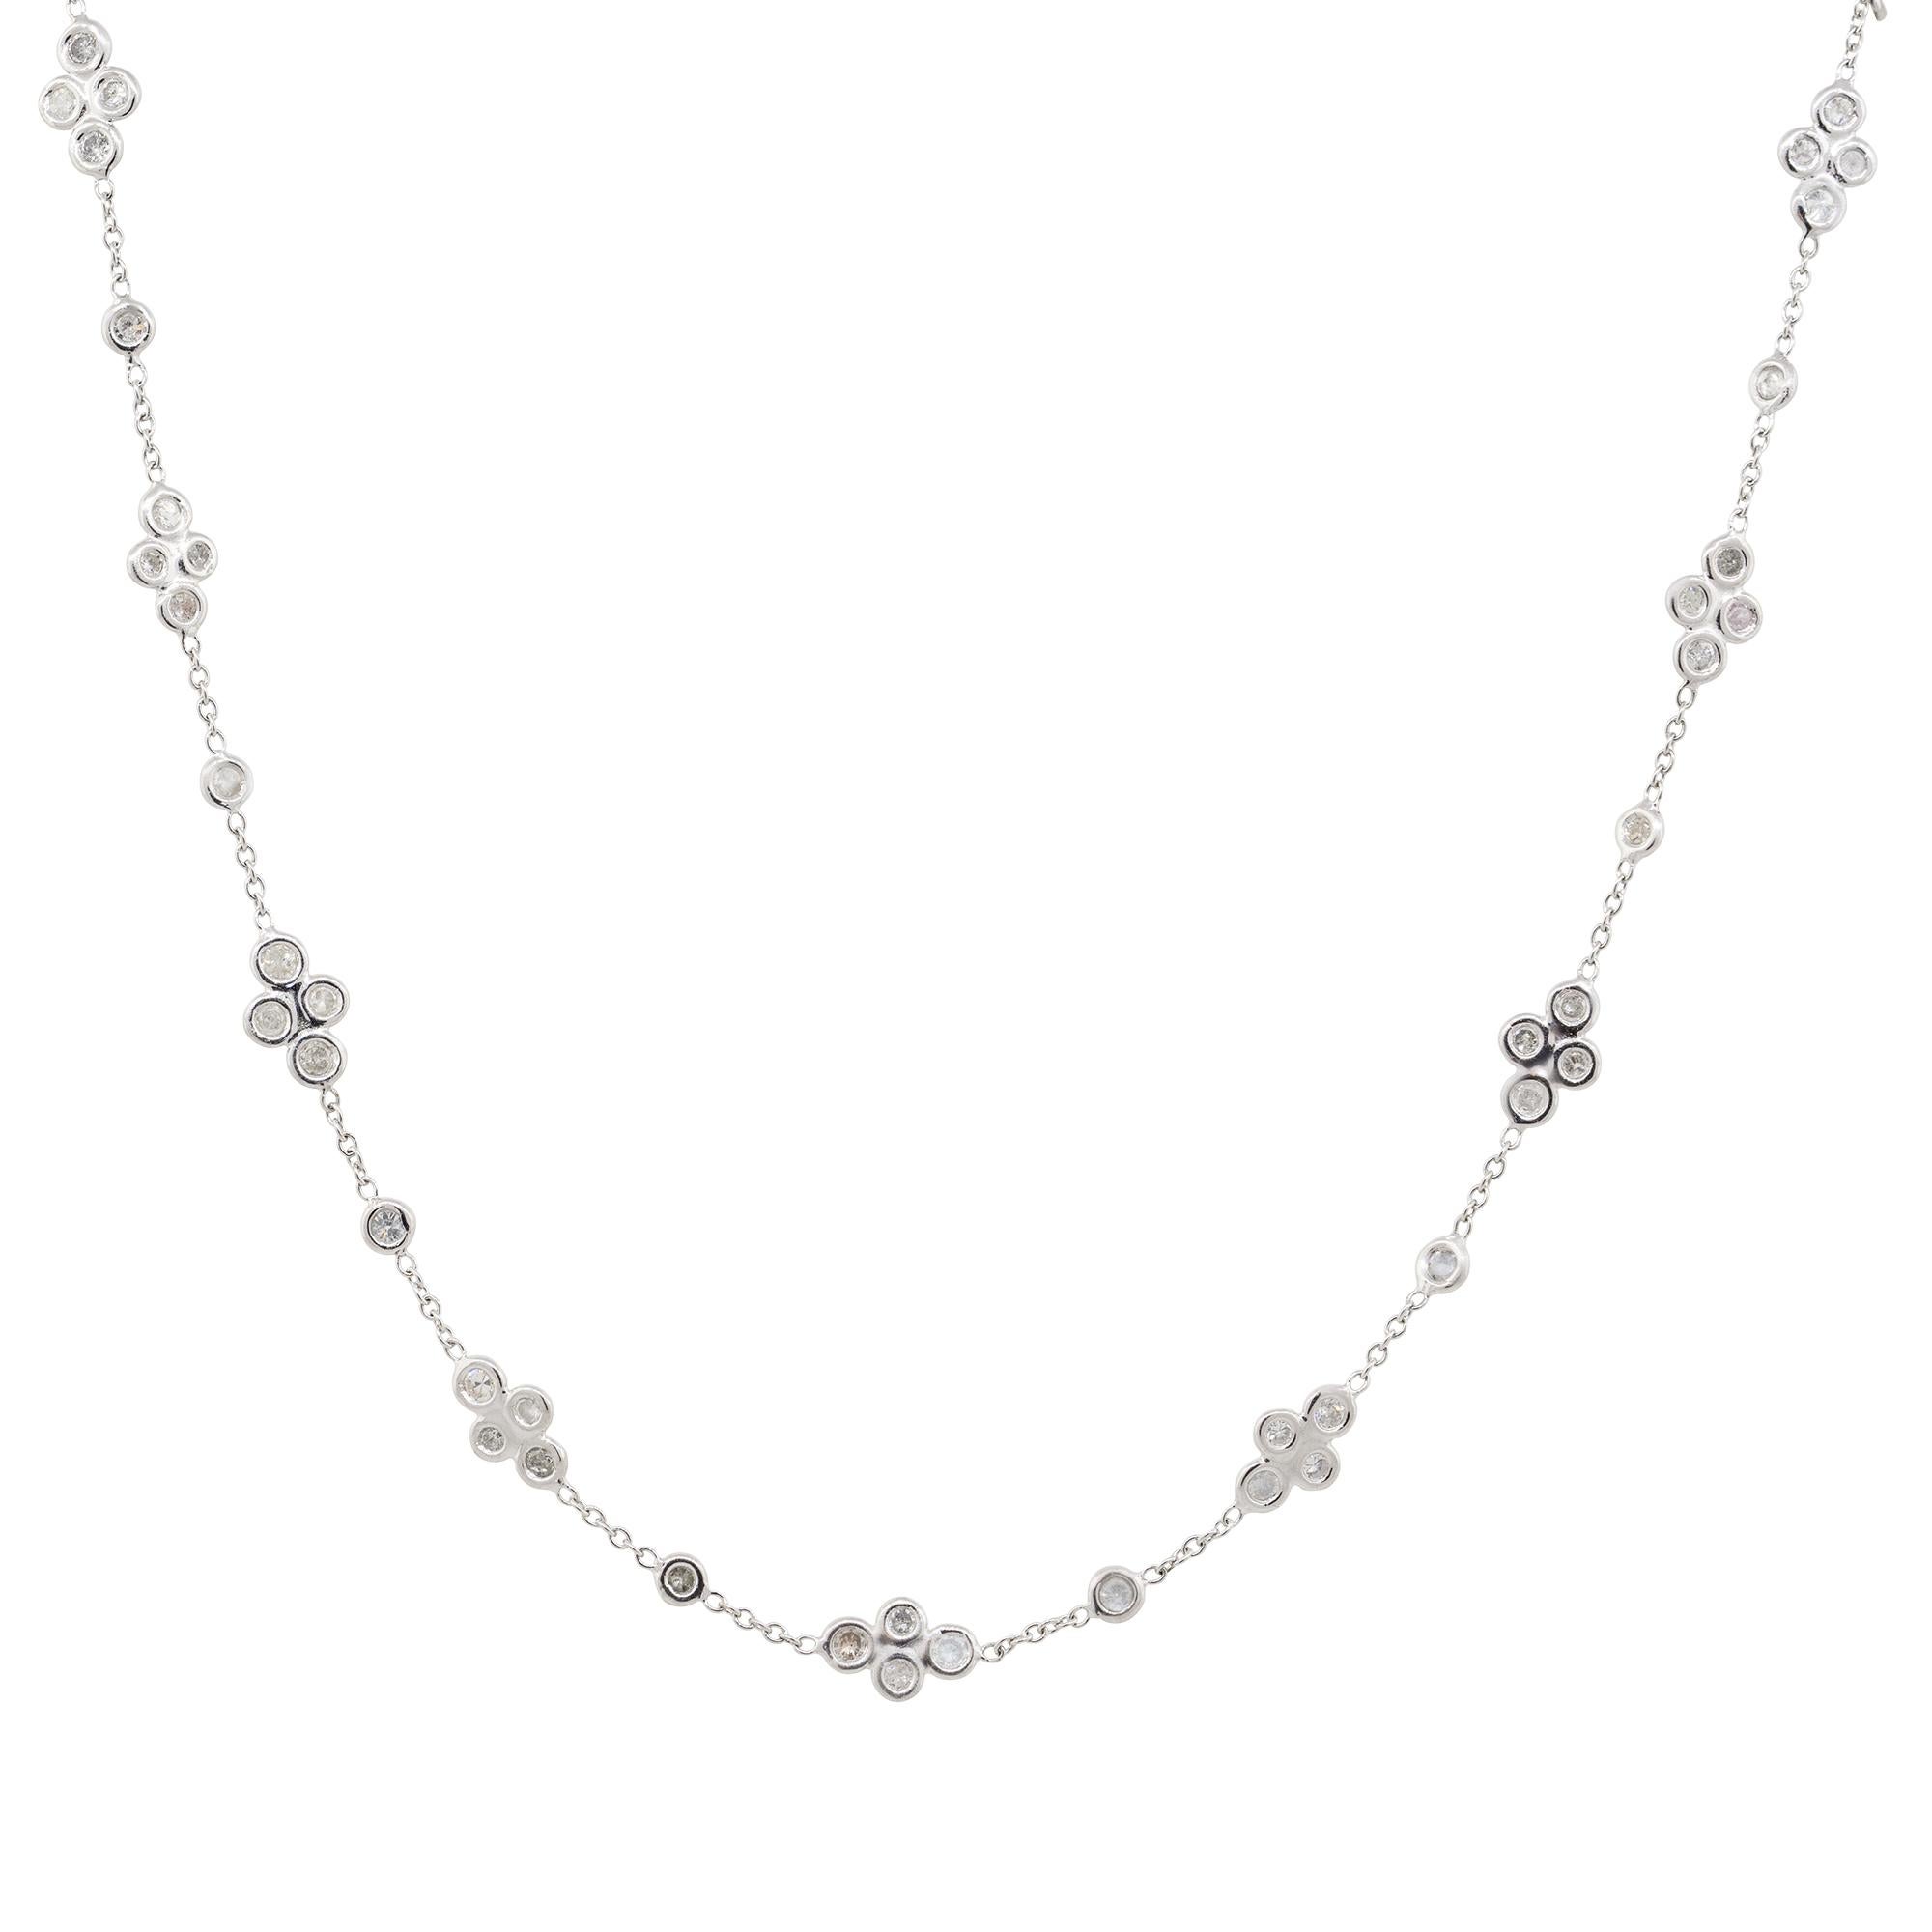 Material: 18k White Gold (clasp is 14k white gold)
Diamond Details: Approx. 2.18ctw of round cut diamonds. Diamonds are G/H in color and VS in clarity
Measurements: Necklace measures 20